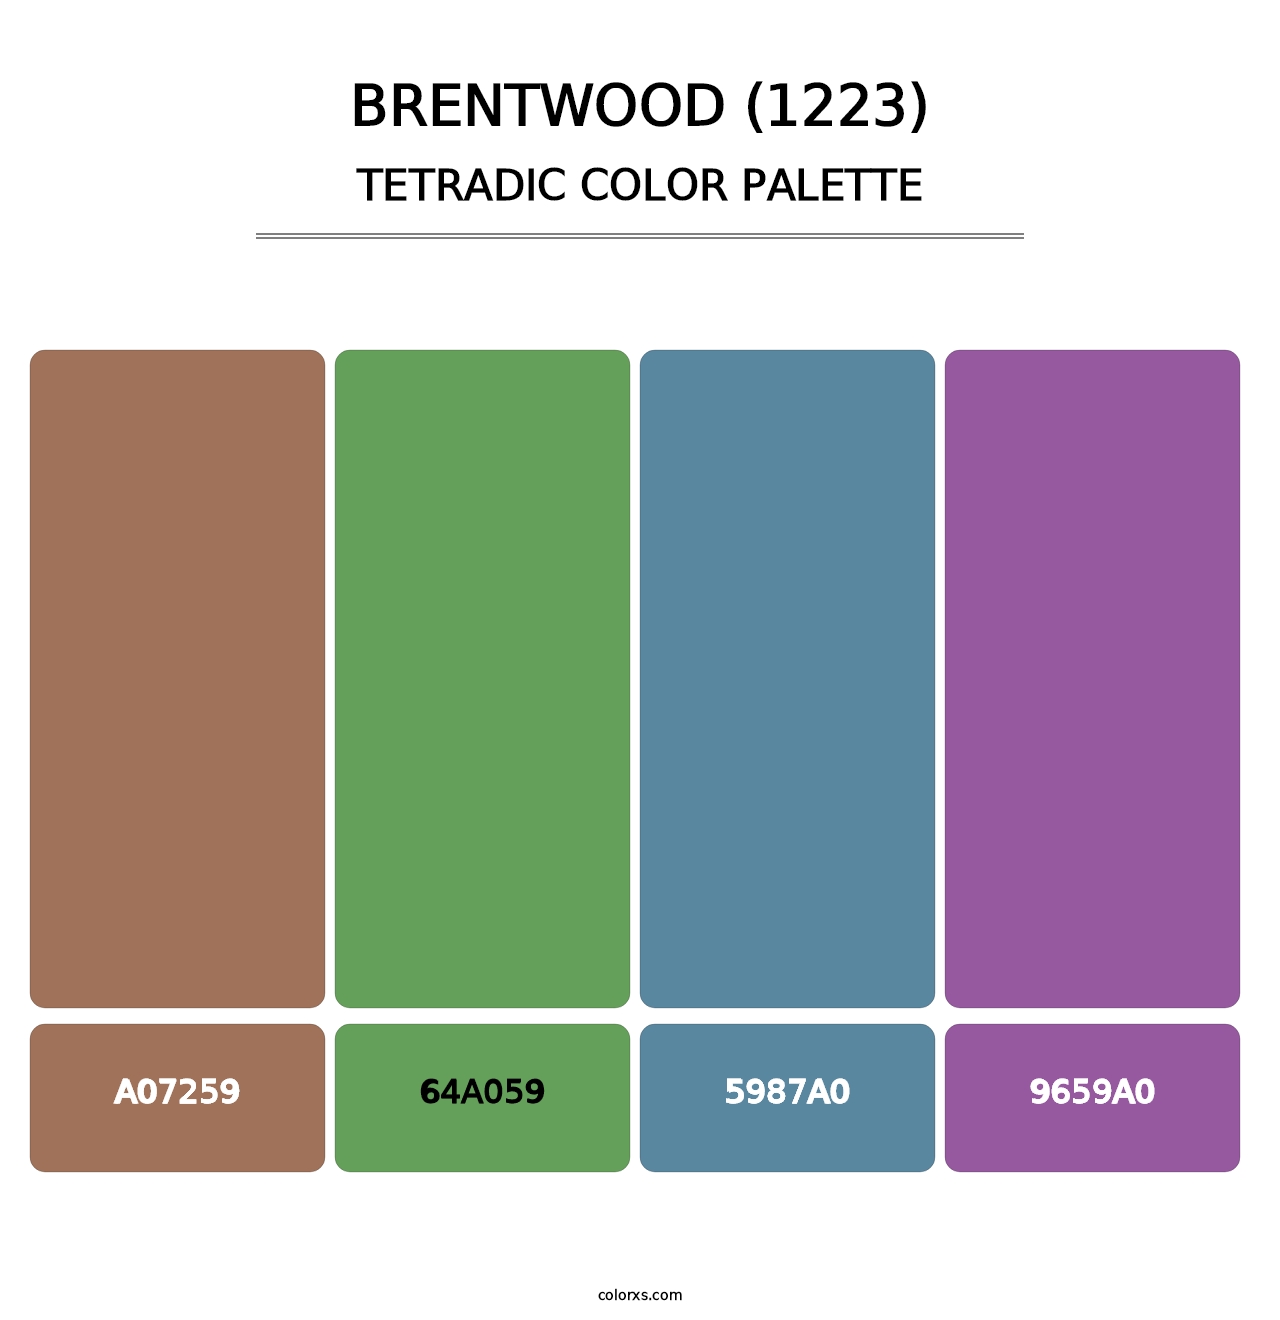 Brentwood (1223) - Tetradic Color Palette